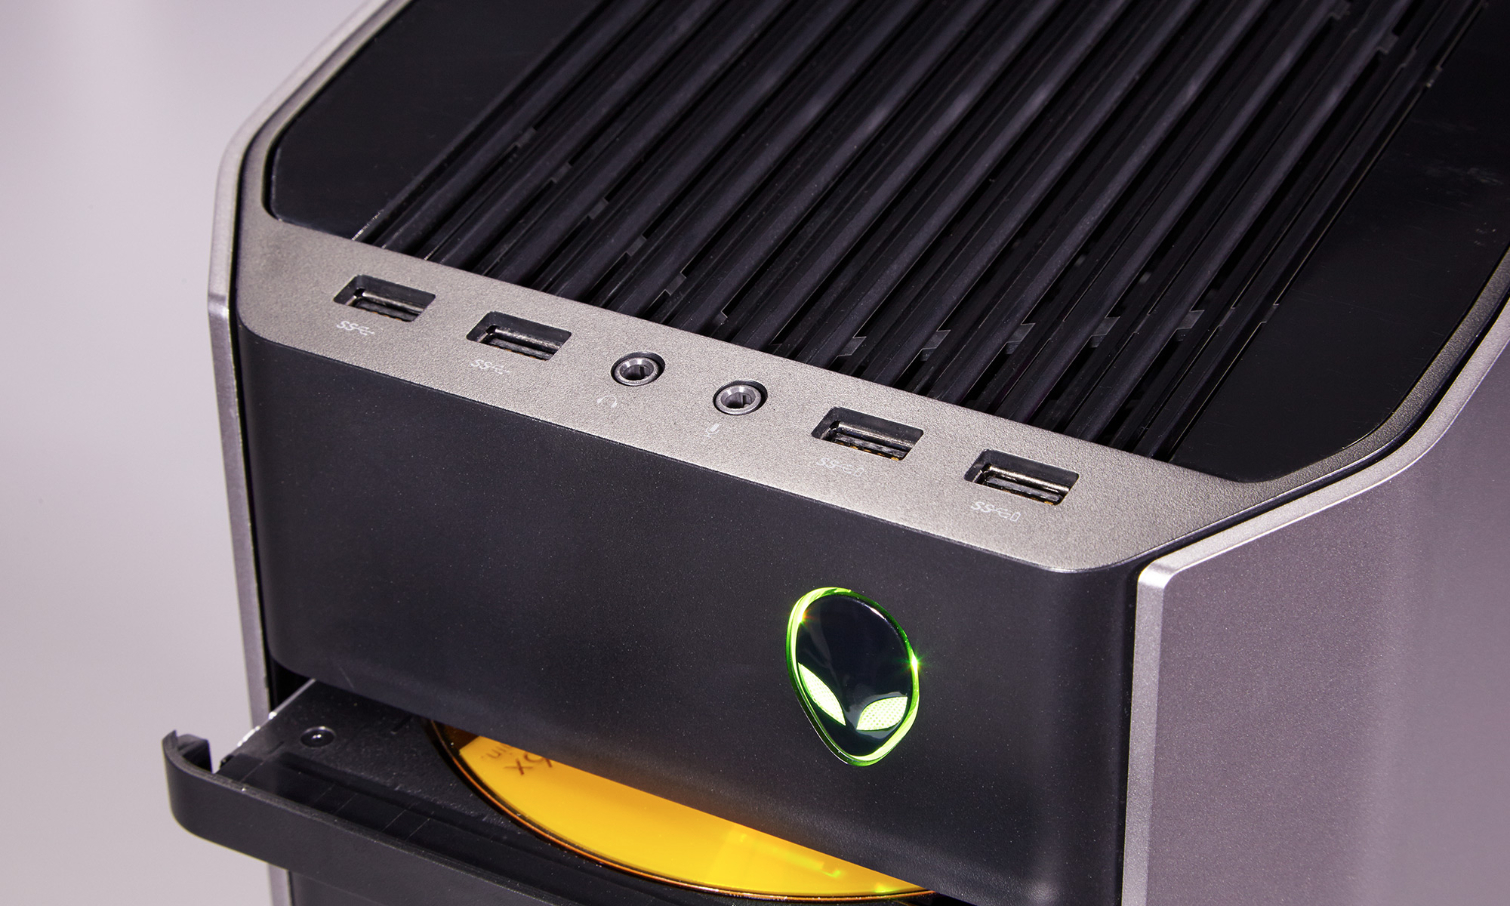 Alienware Aurora R5 Review: Awesomely Upgradable | Tom's Guide